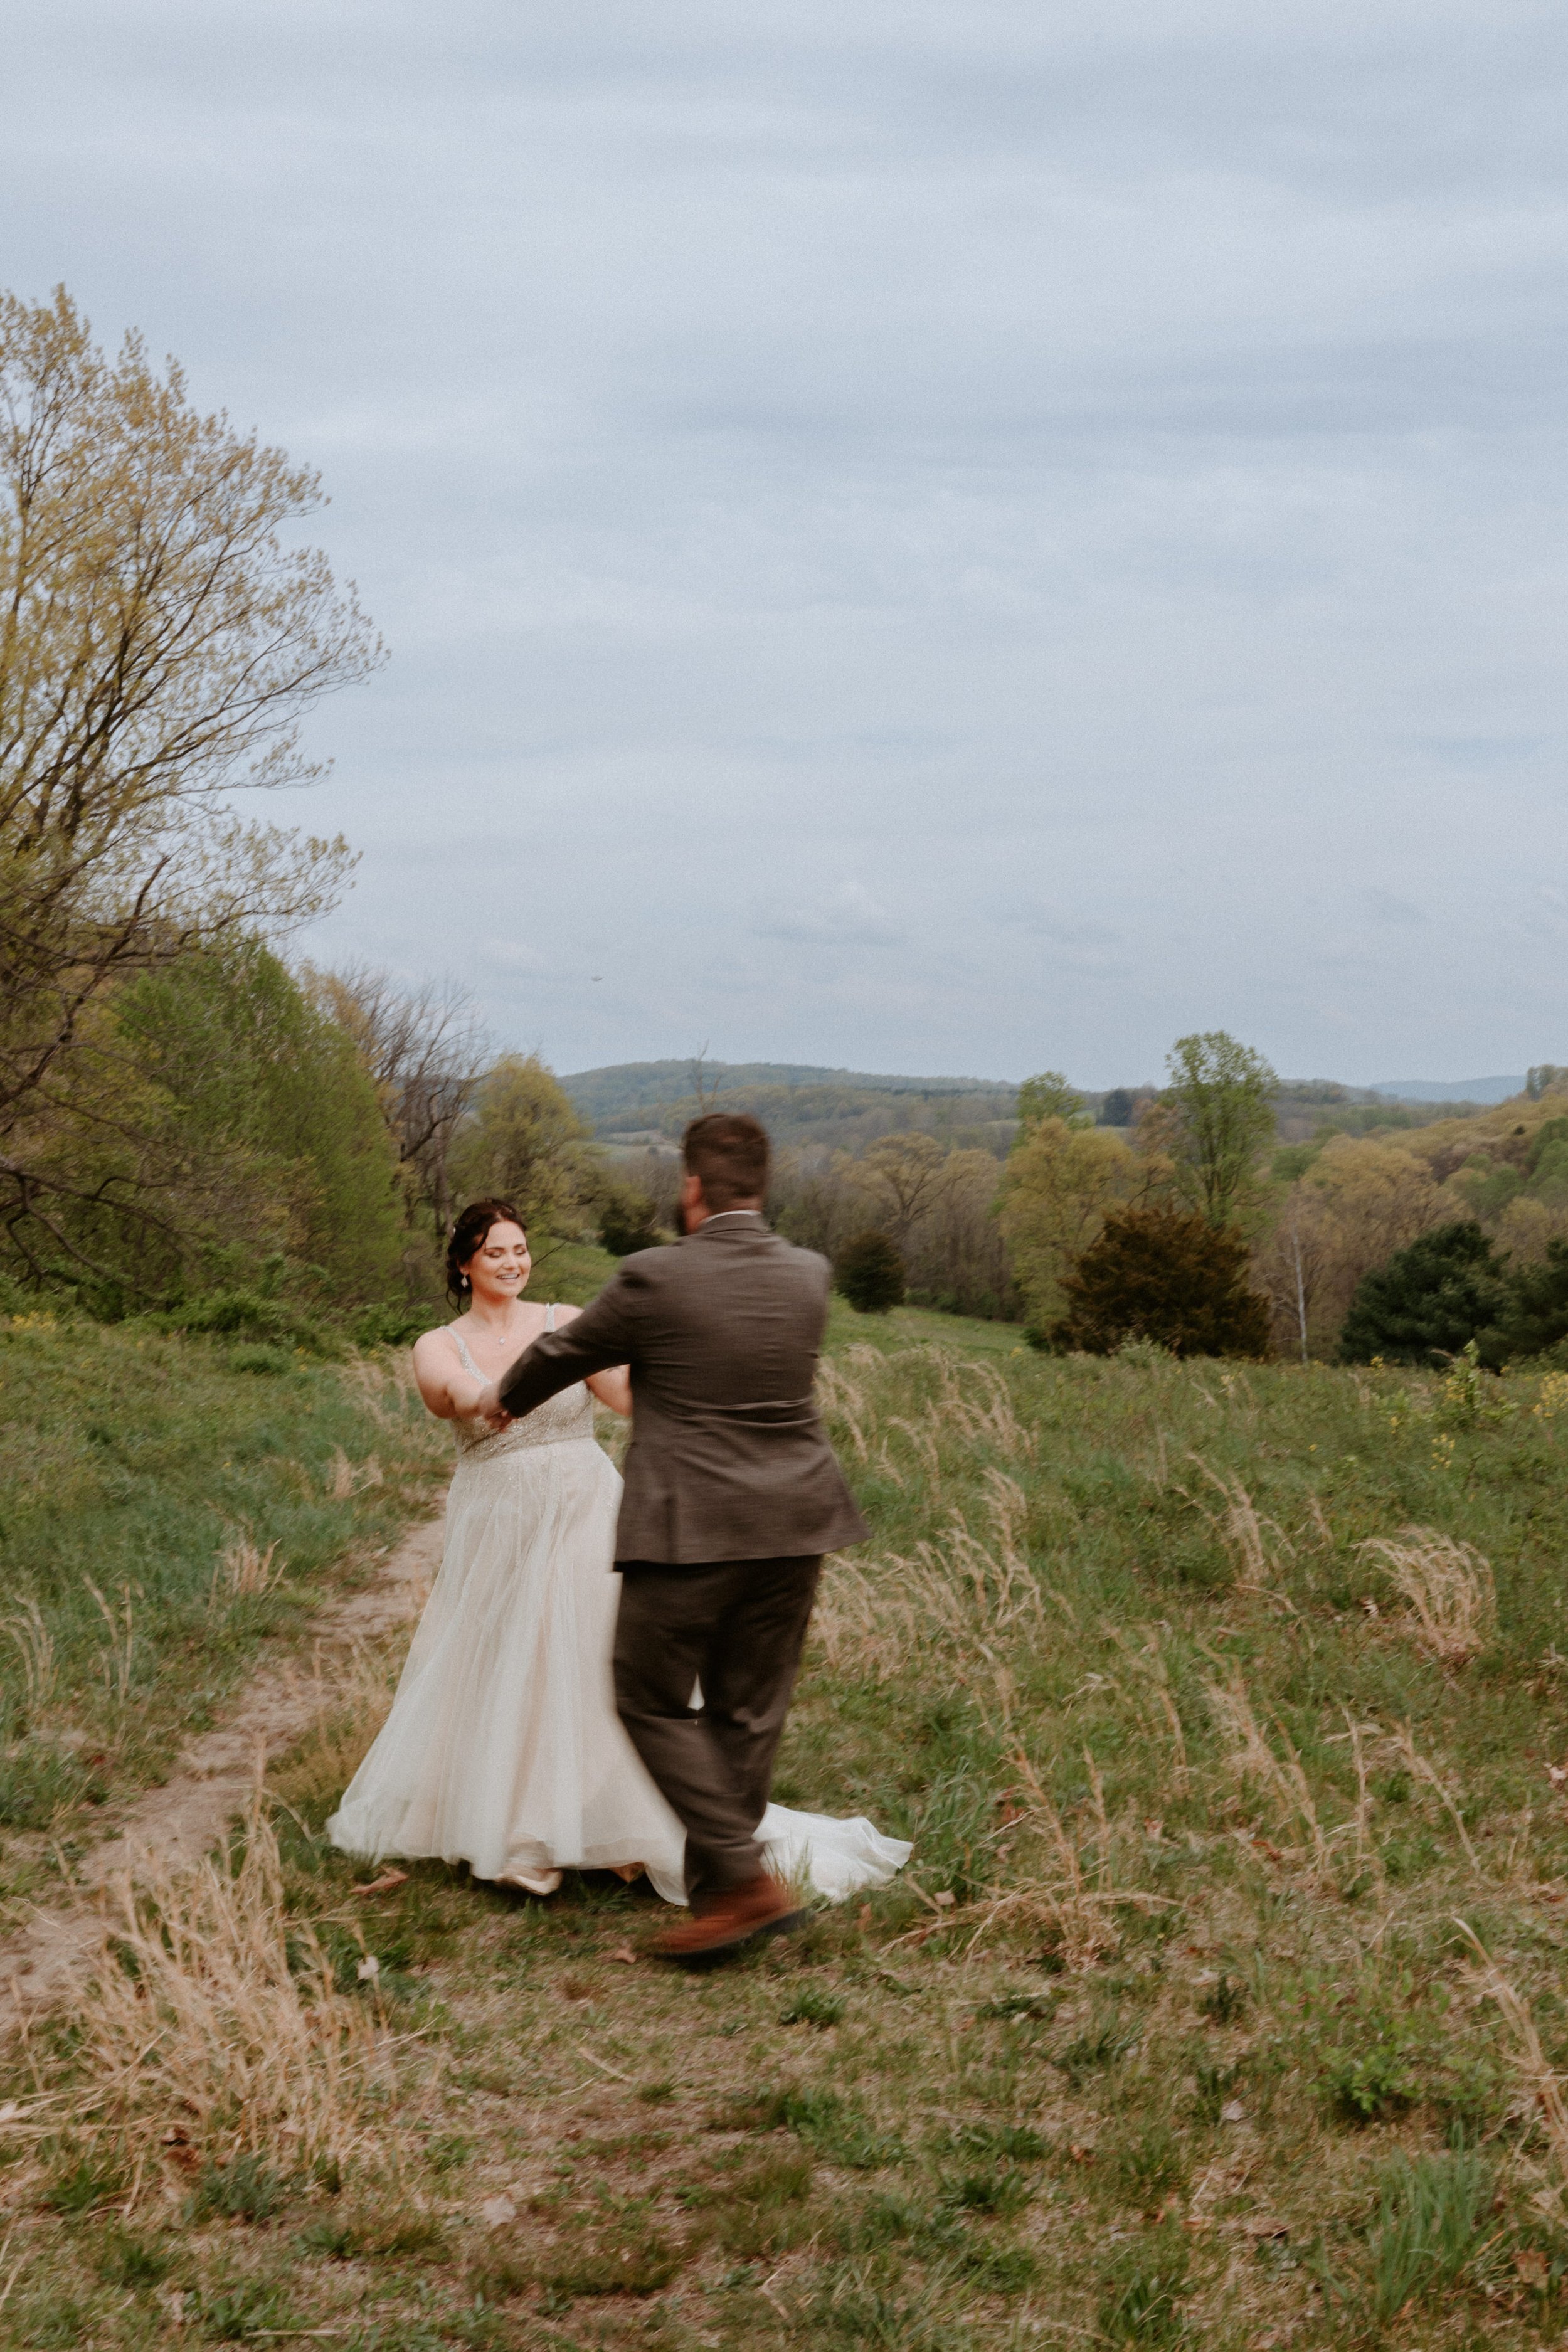 Bride and groom spin in circles in open landscape.